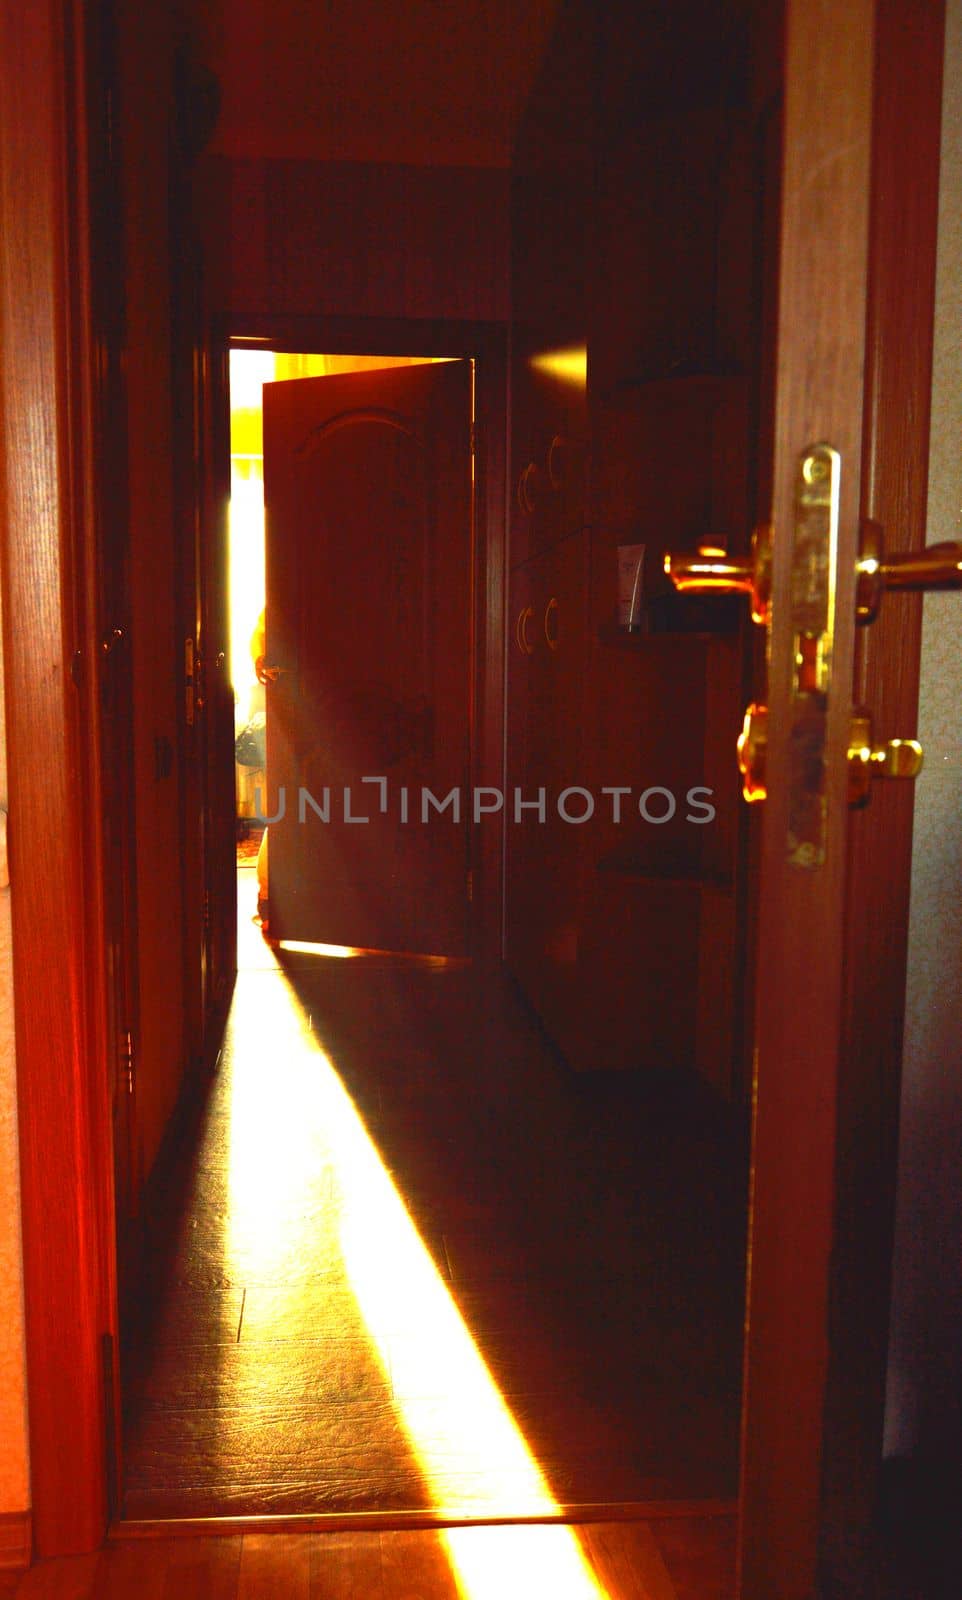 A beam of light falling on the floor through the open door in the room by claire_lucia